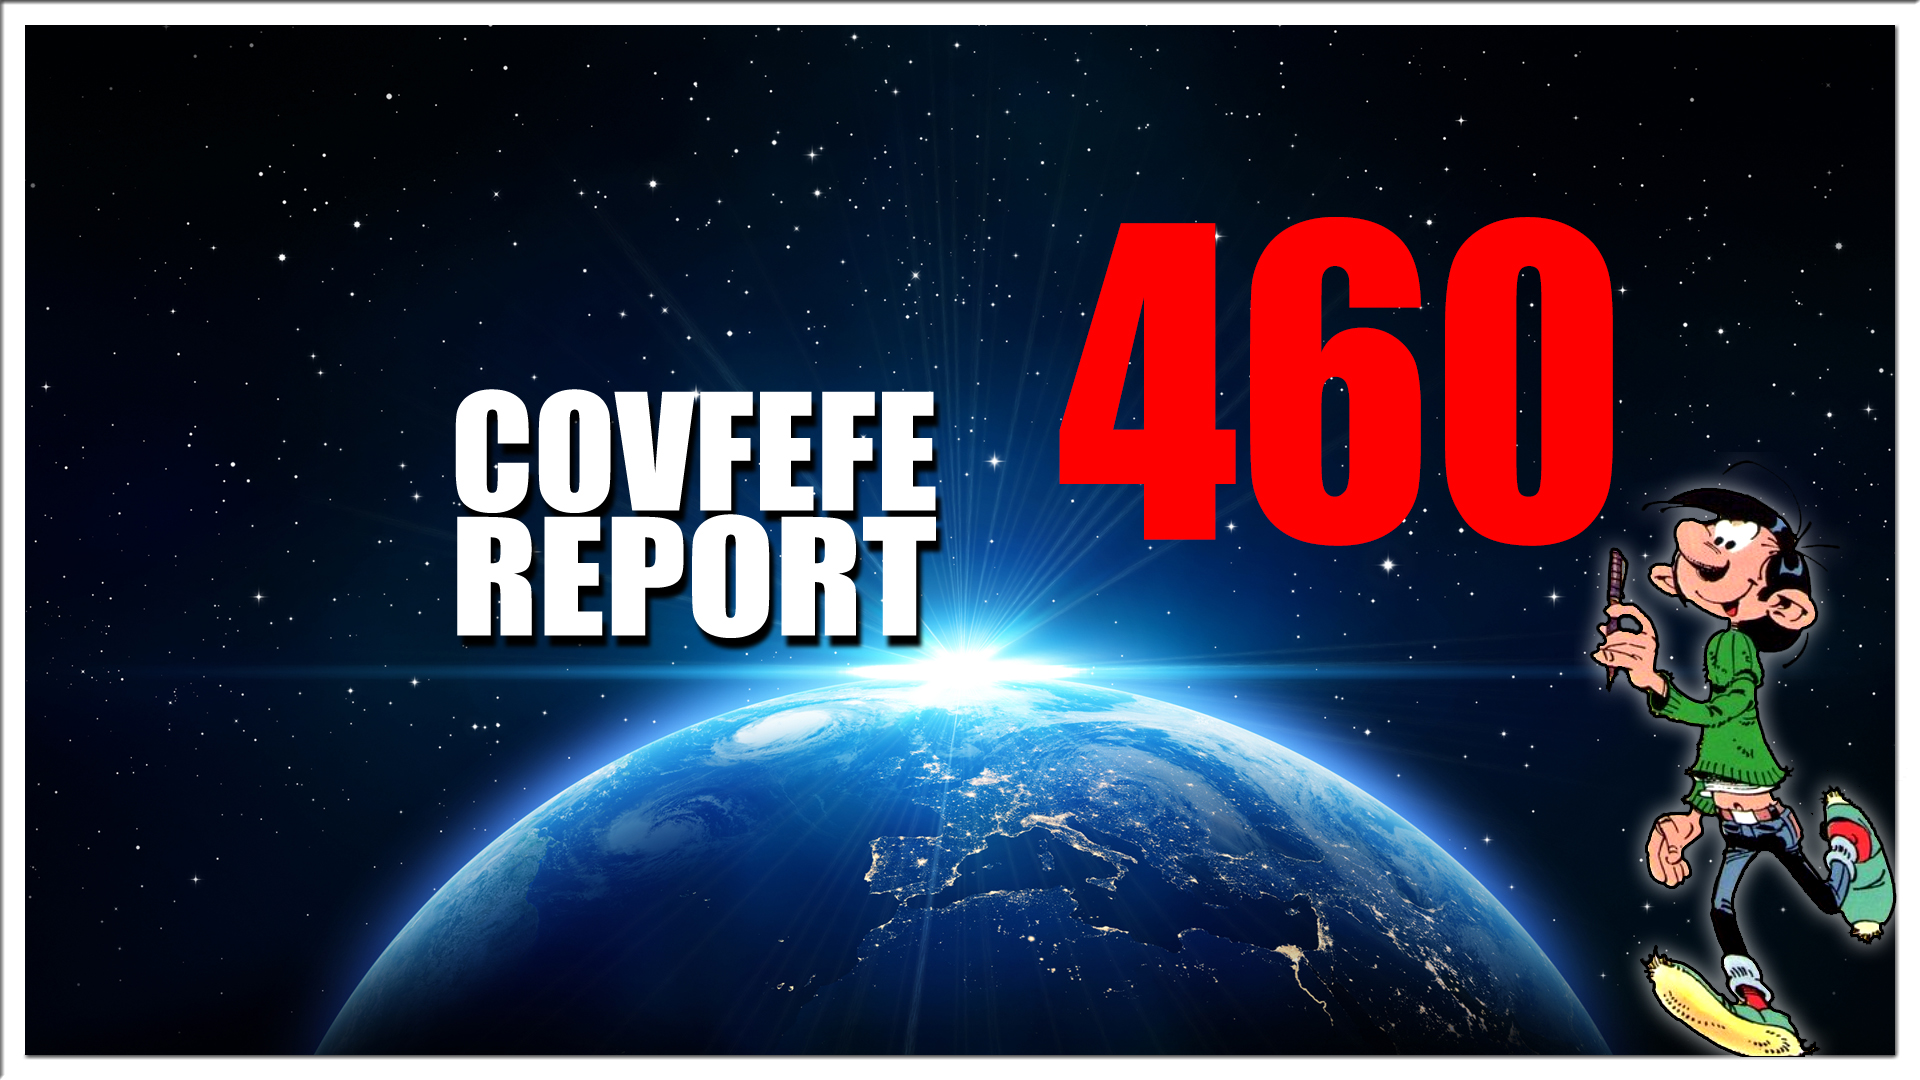 Covfefe Report 460.Jurgen Conings, Licence to kill, TG-reacties, A storm is Coming